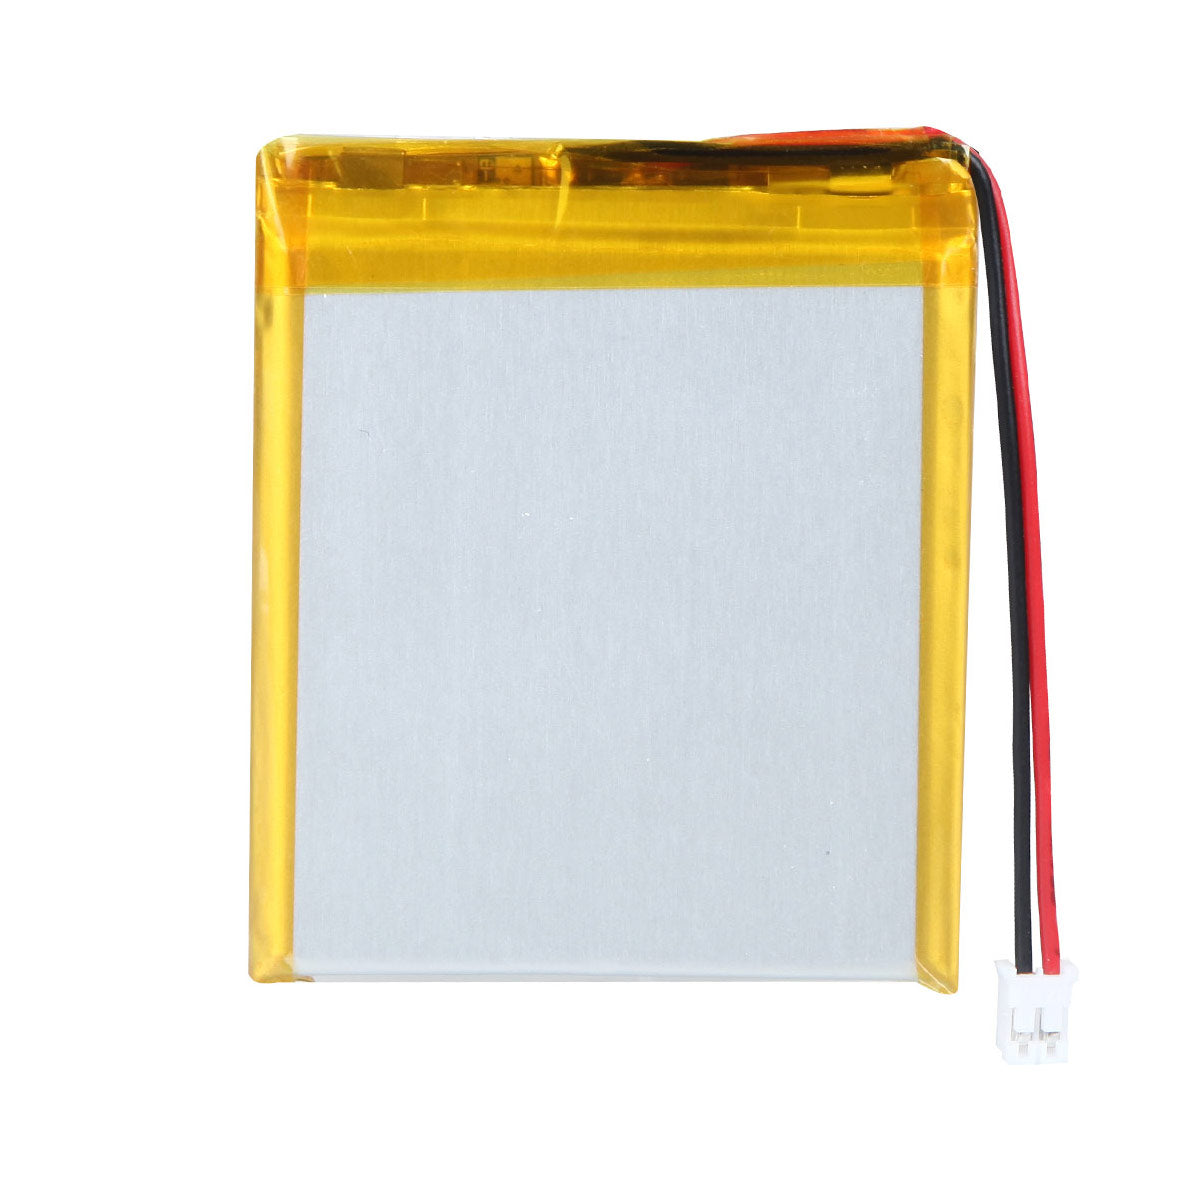 3.7V 1250mAh 384659 Rechargeable Lithium Polymer Battery